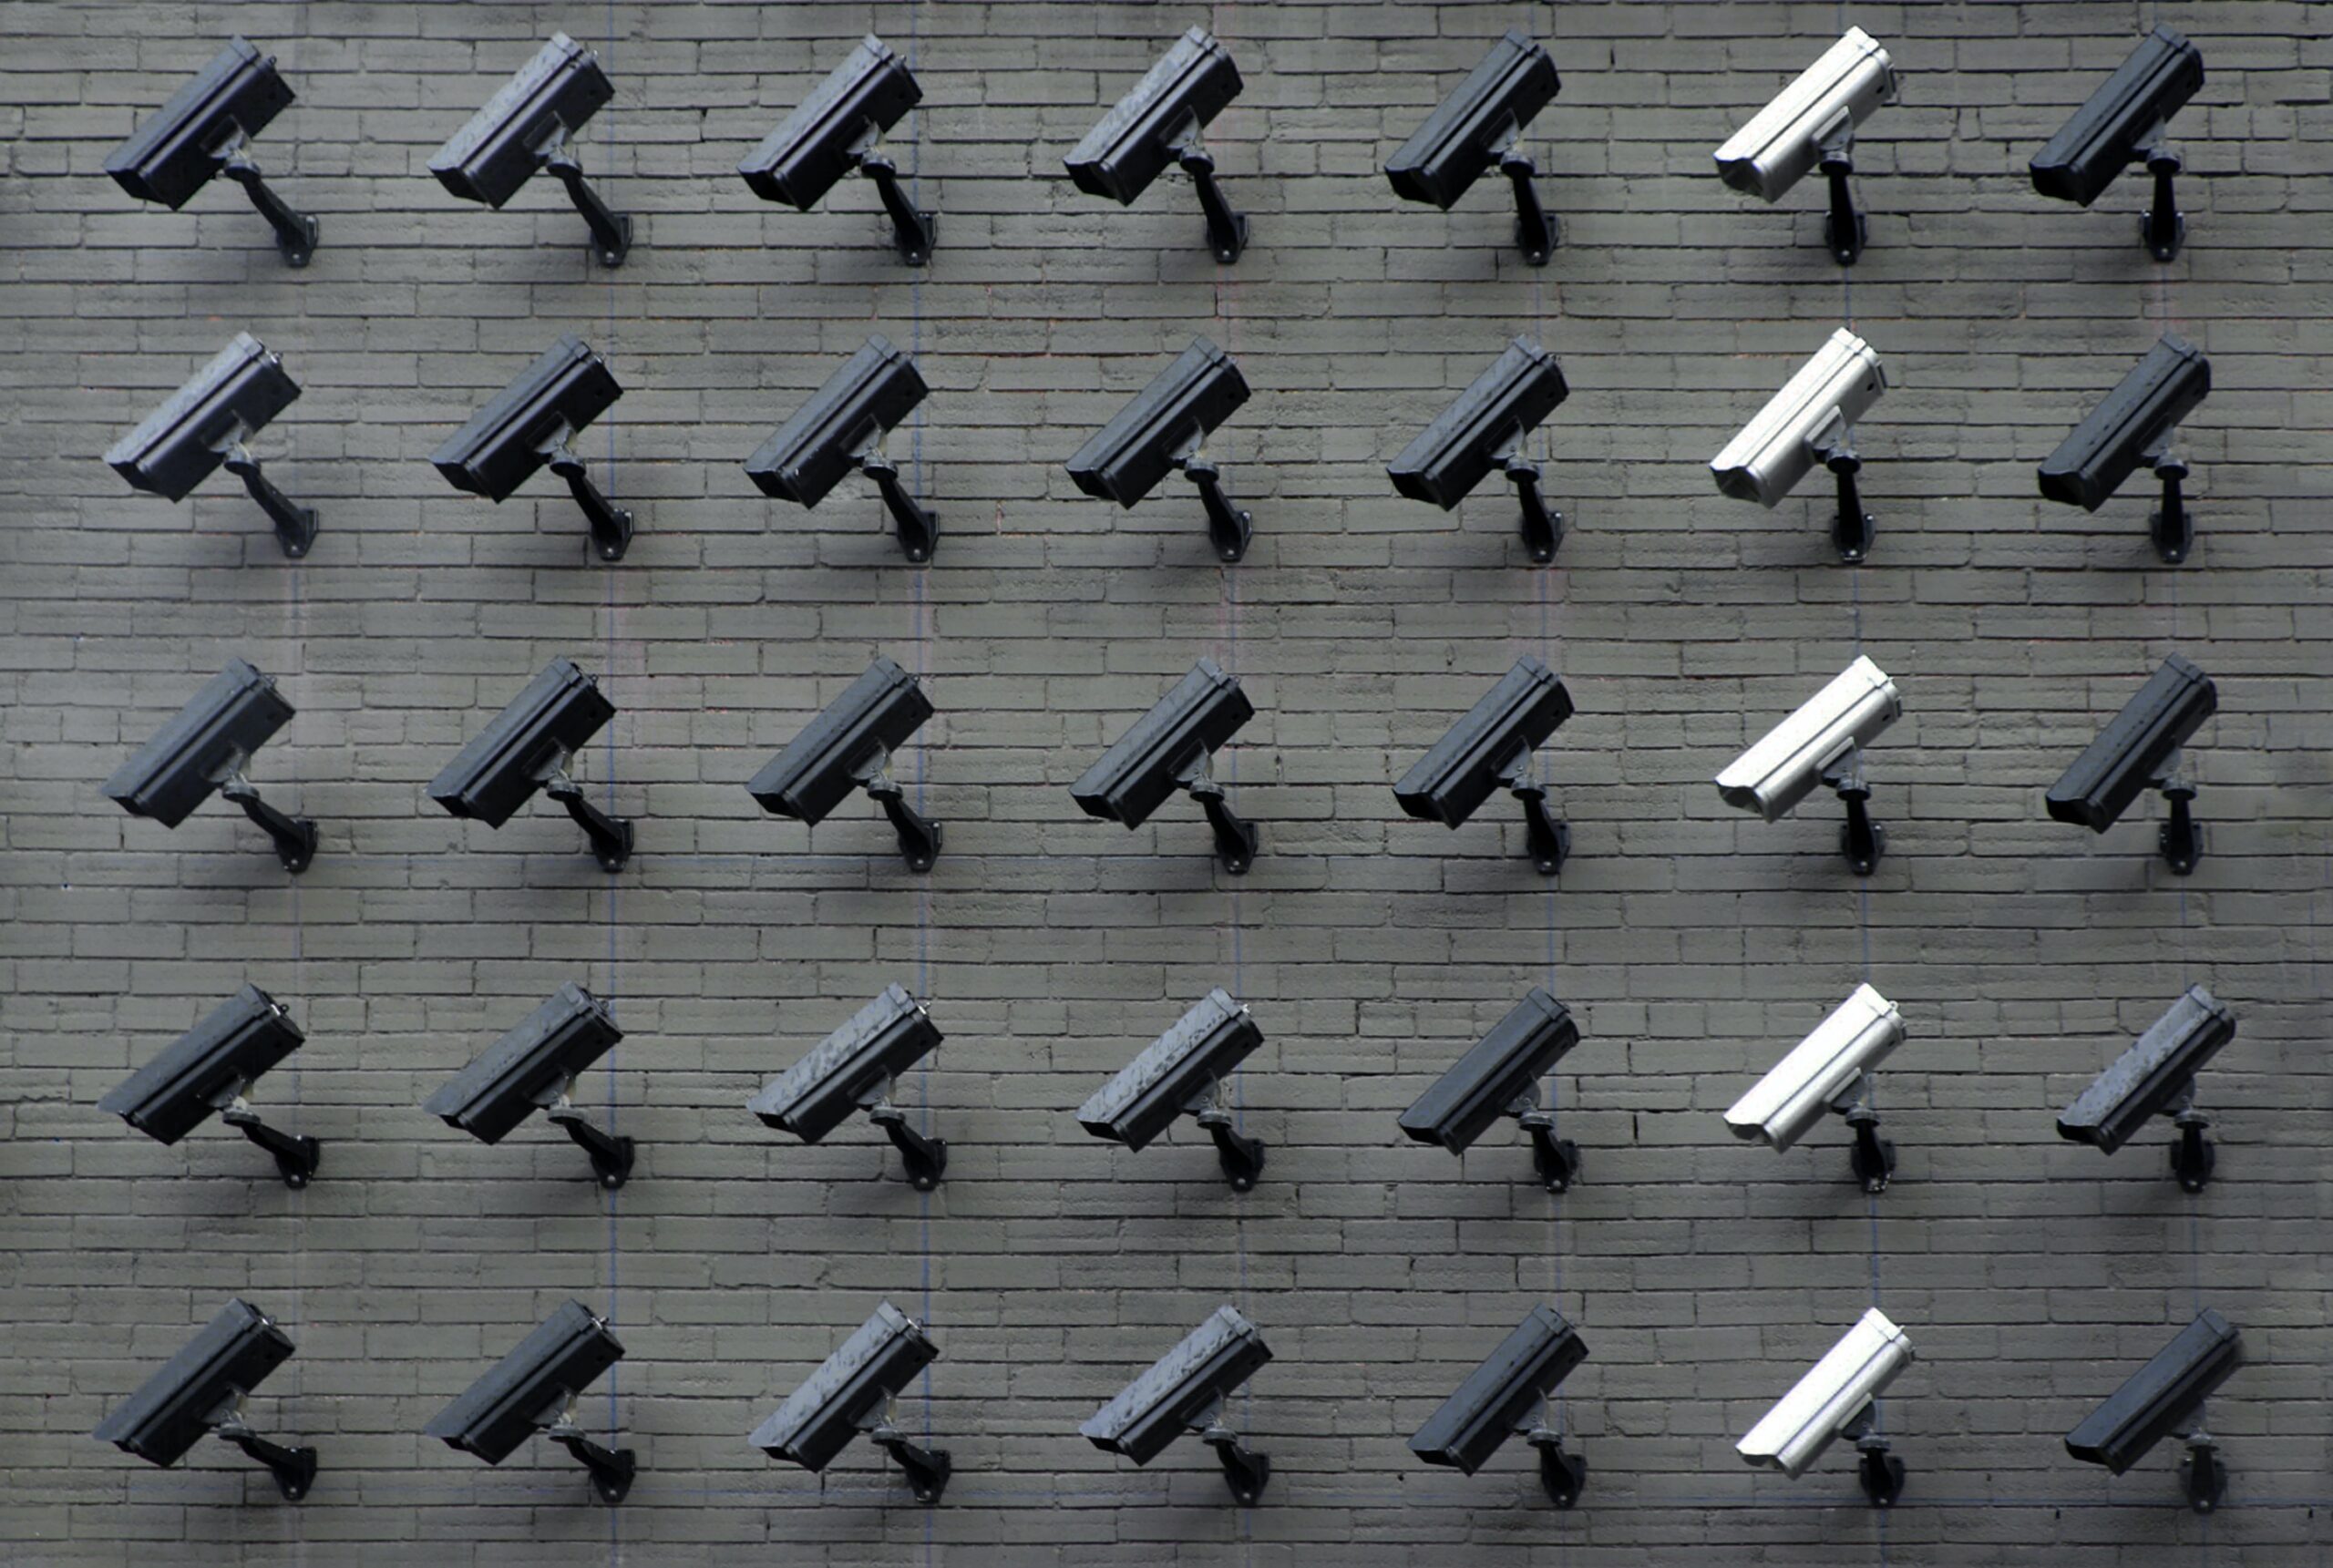 11 Items to Consider When Planning to Install CCTV Cameras